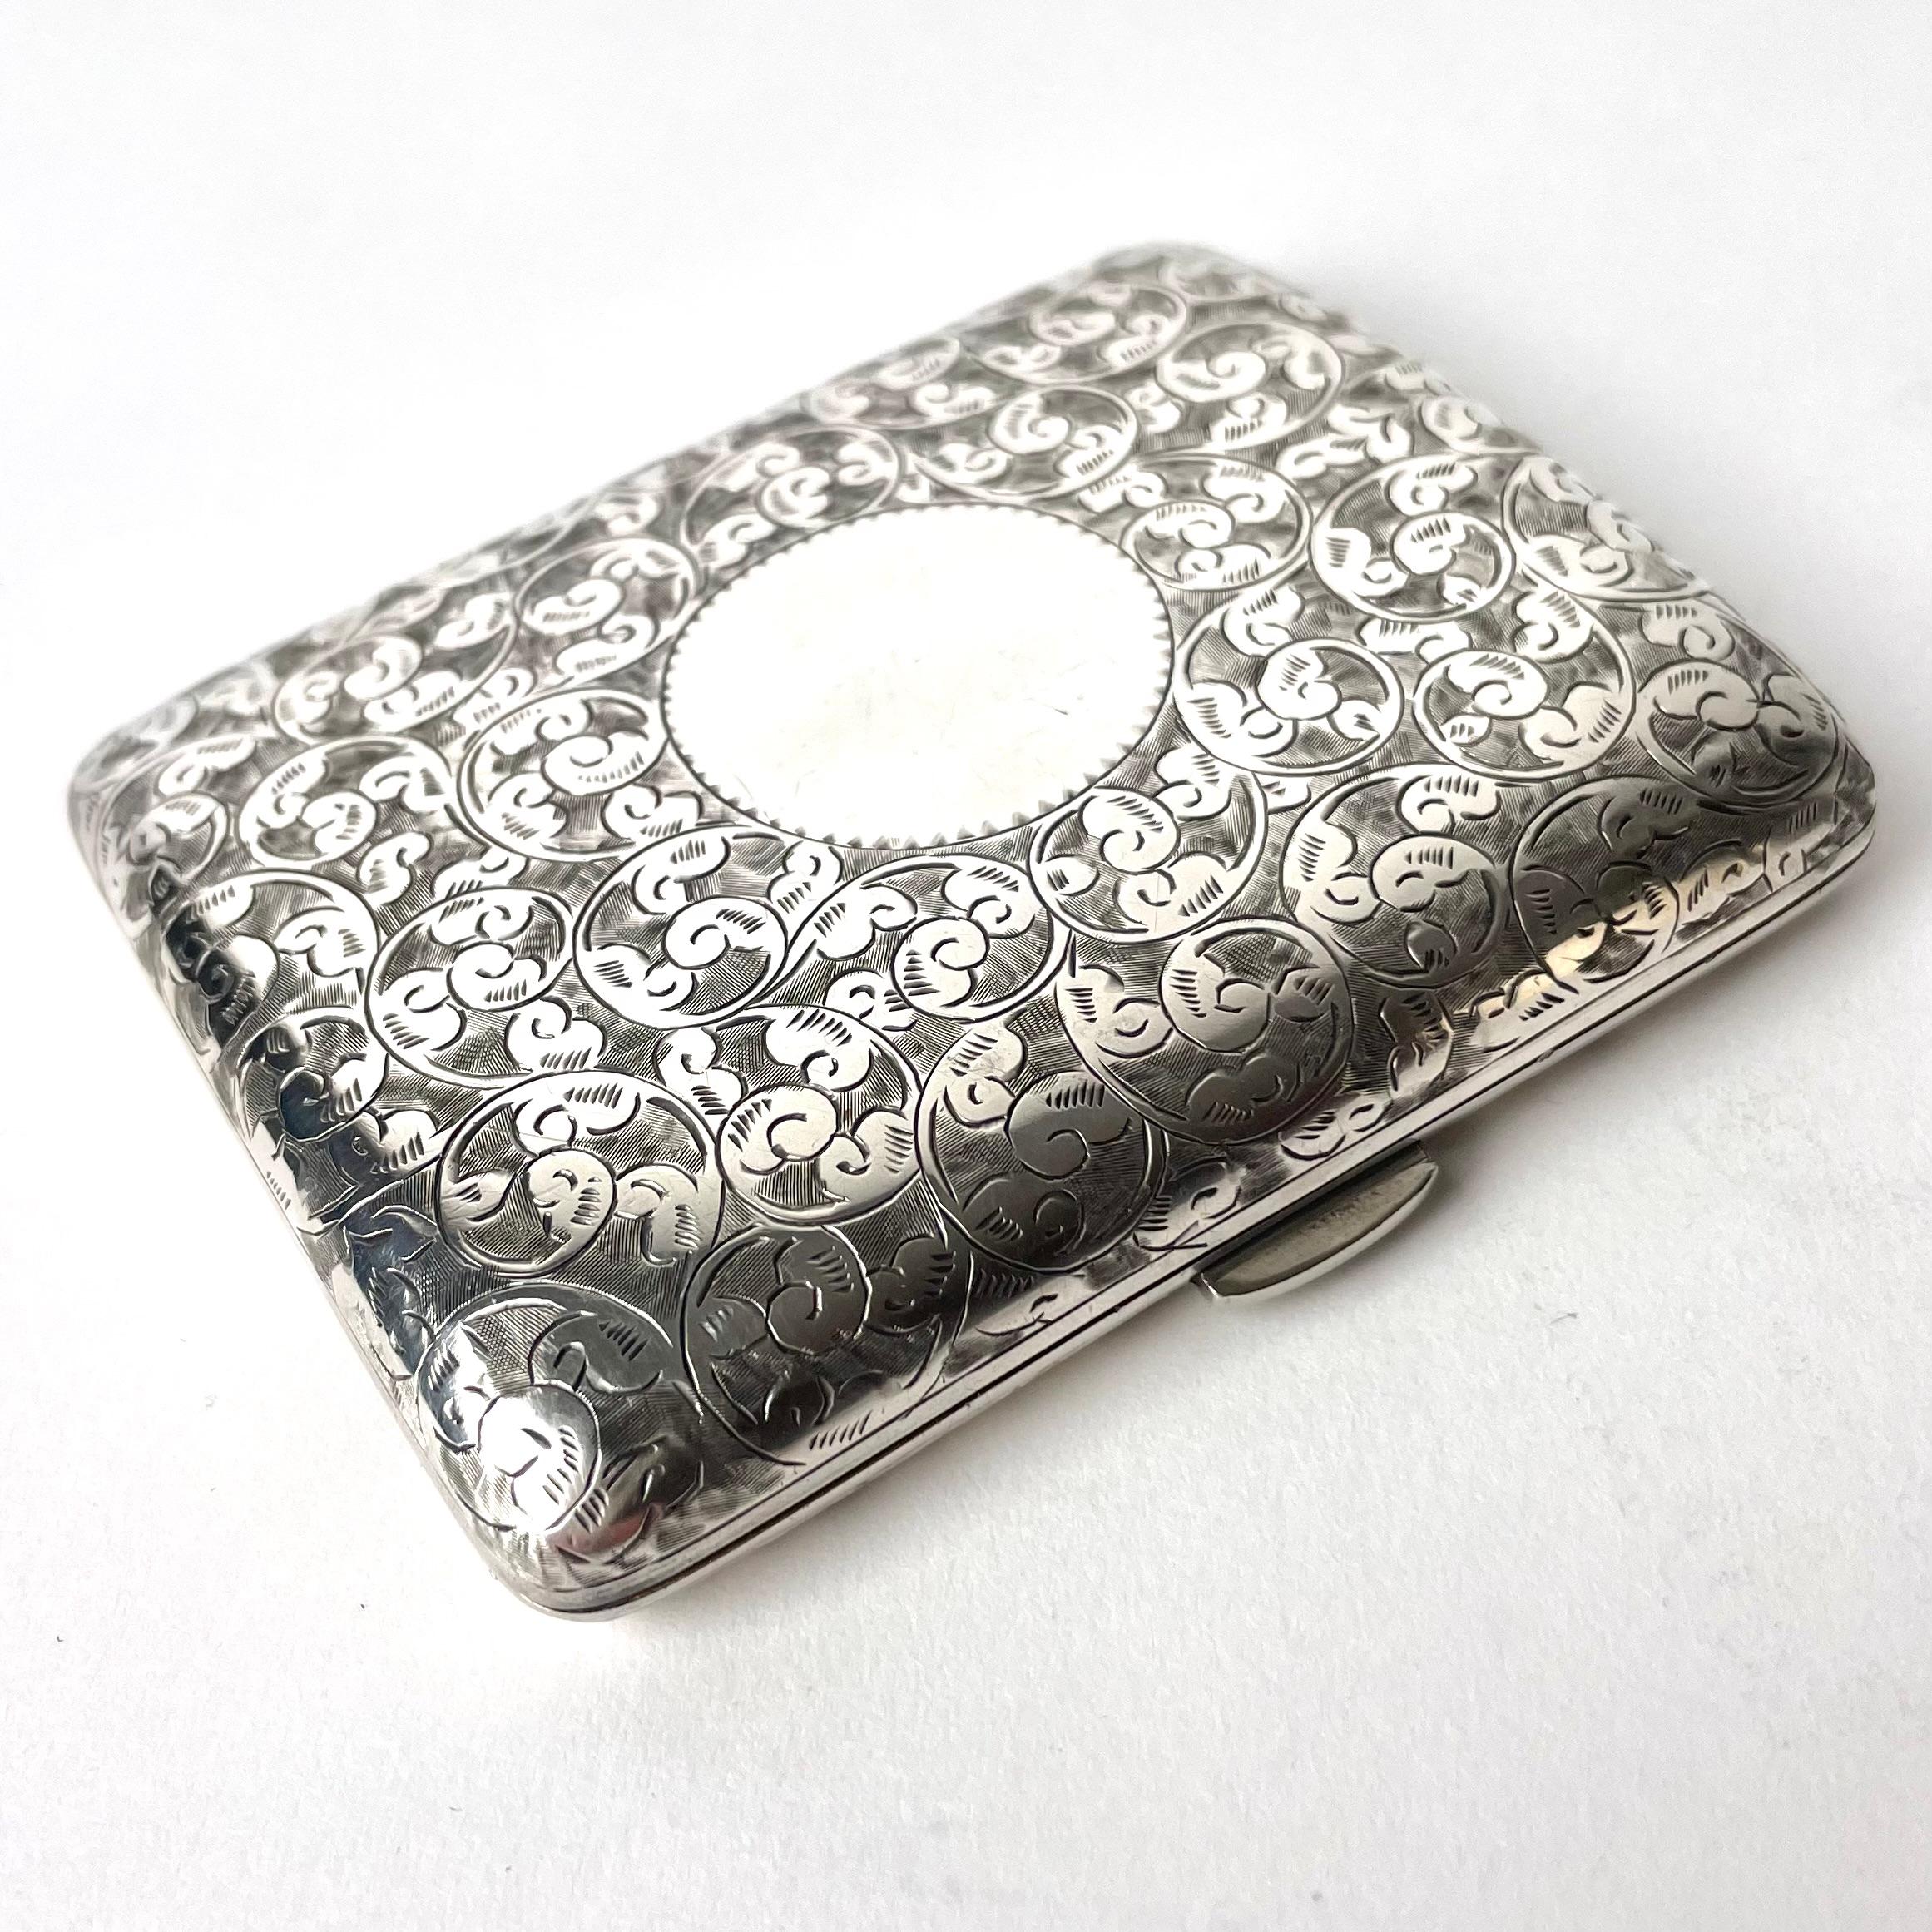 Elegant cigarette case in silver from Birmingham, England in 1899. Beautifully decorated with leaves and gilding on the inside.

Wear consistent with age and use.